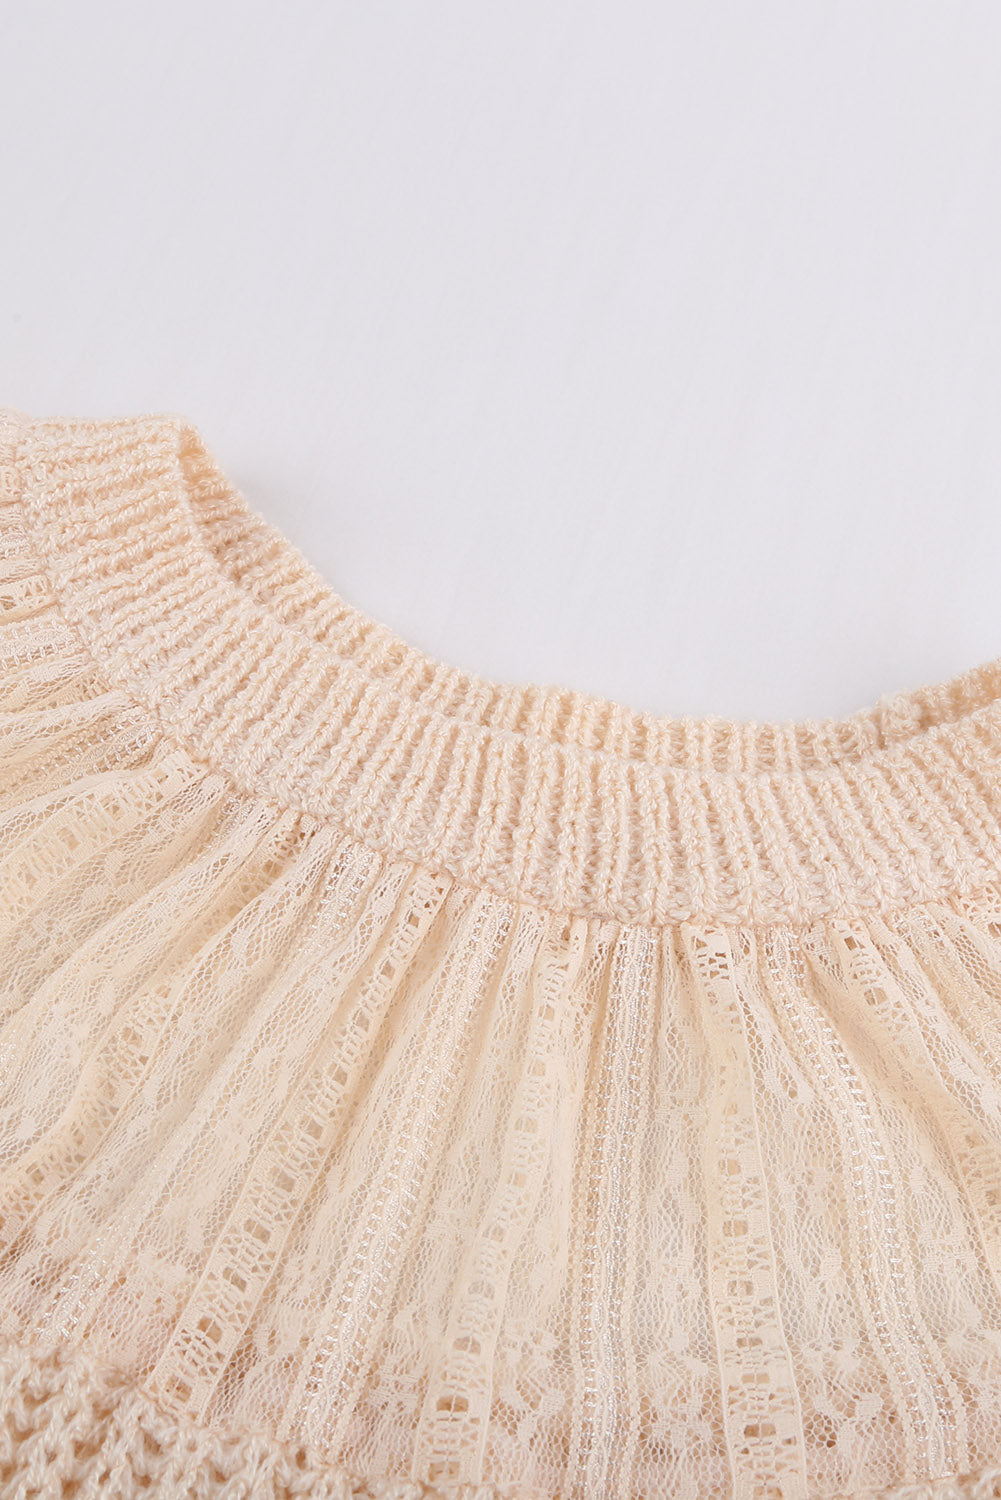 Chic Beige Round Neck Lace Splicing Knitted Sweater